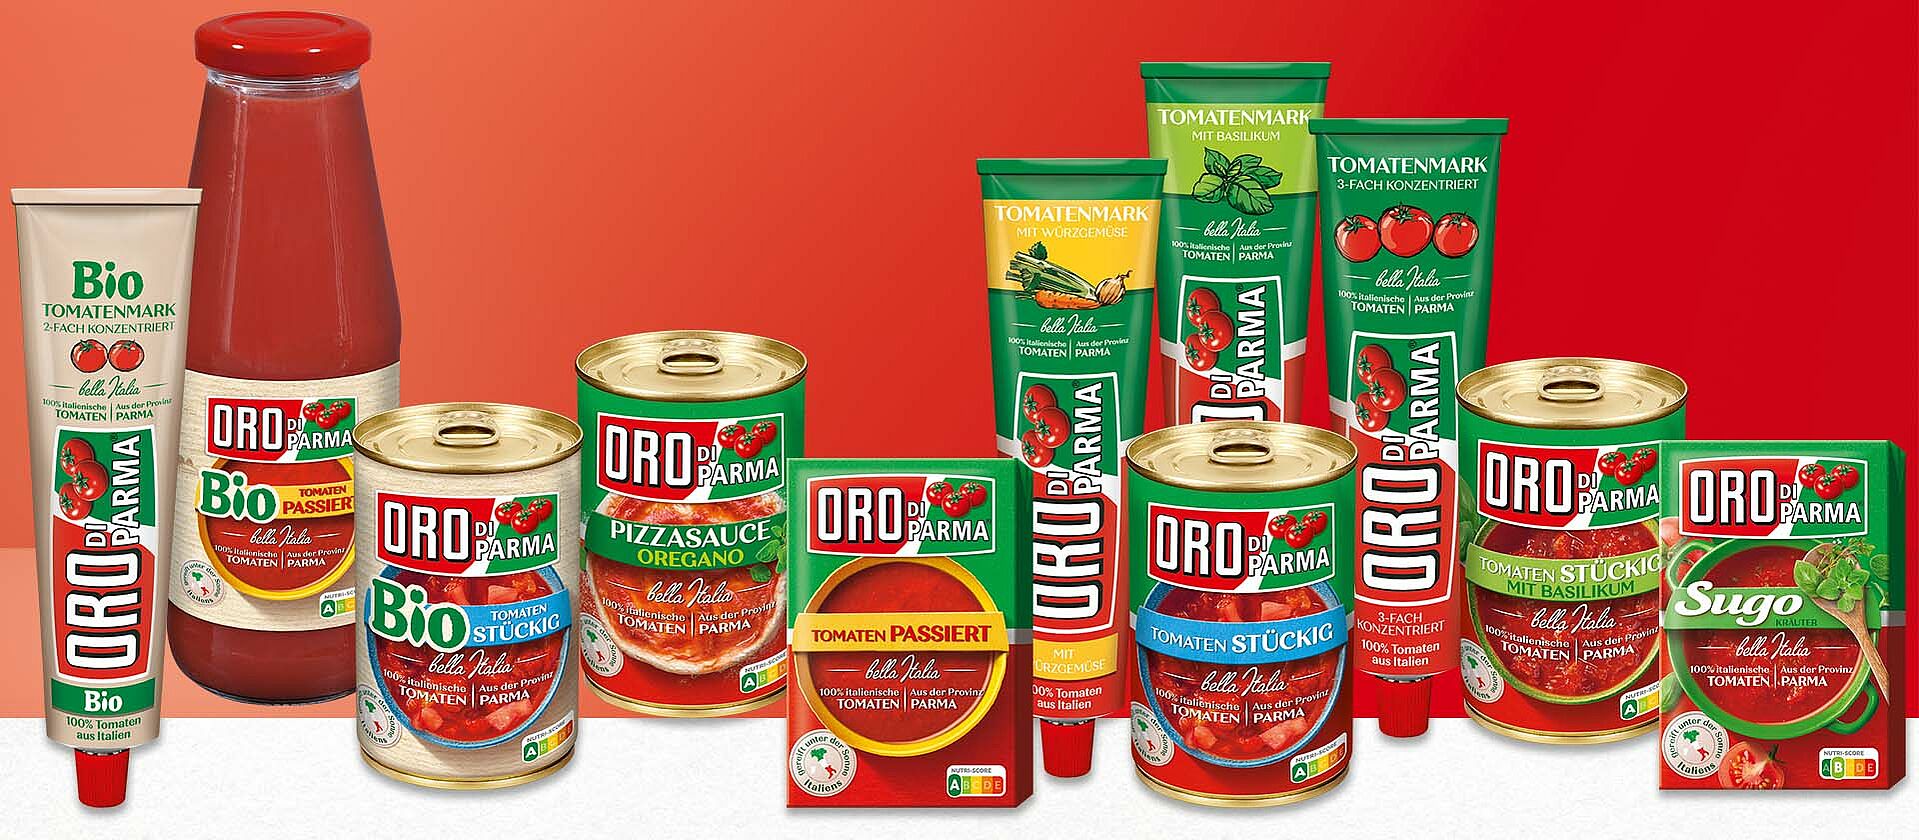 Products made of sun-ripened tomatoes | ORO di Parma